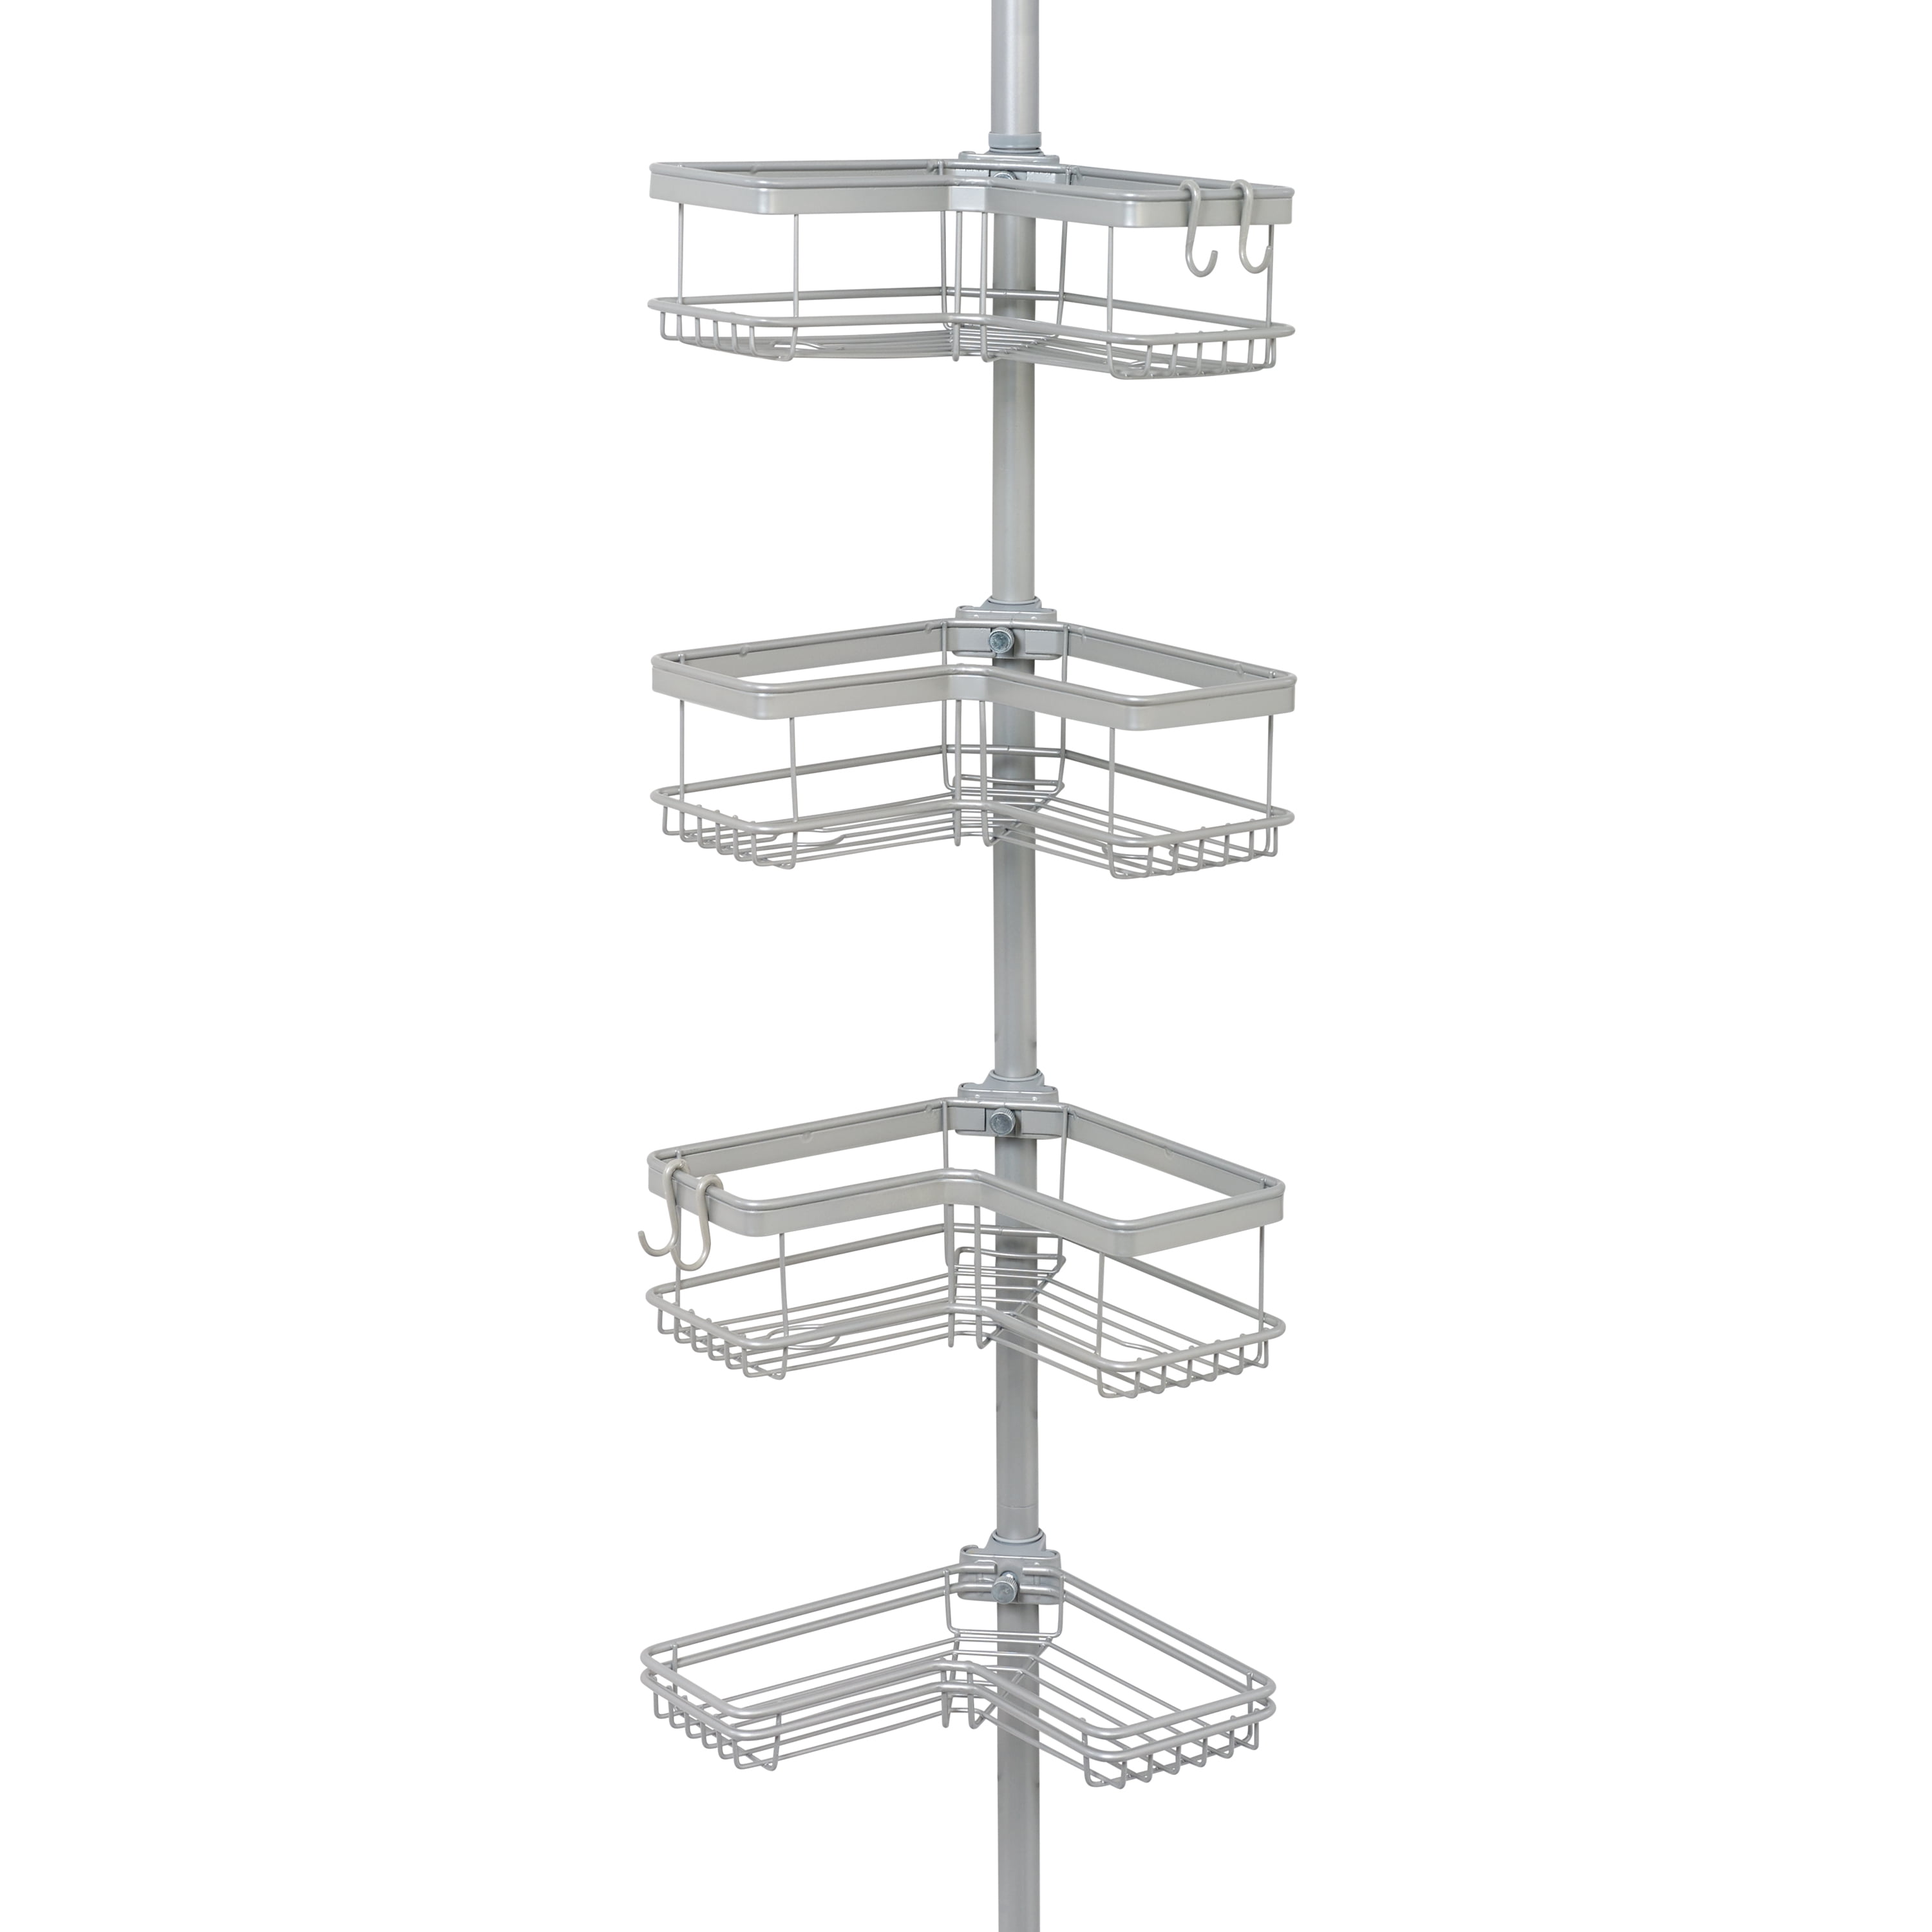 6 Tiers 95 to 116 Inch Rustproof Shower Caddy Tension Pole with 5 Shelves +  1 To